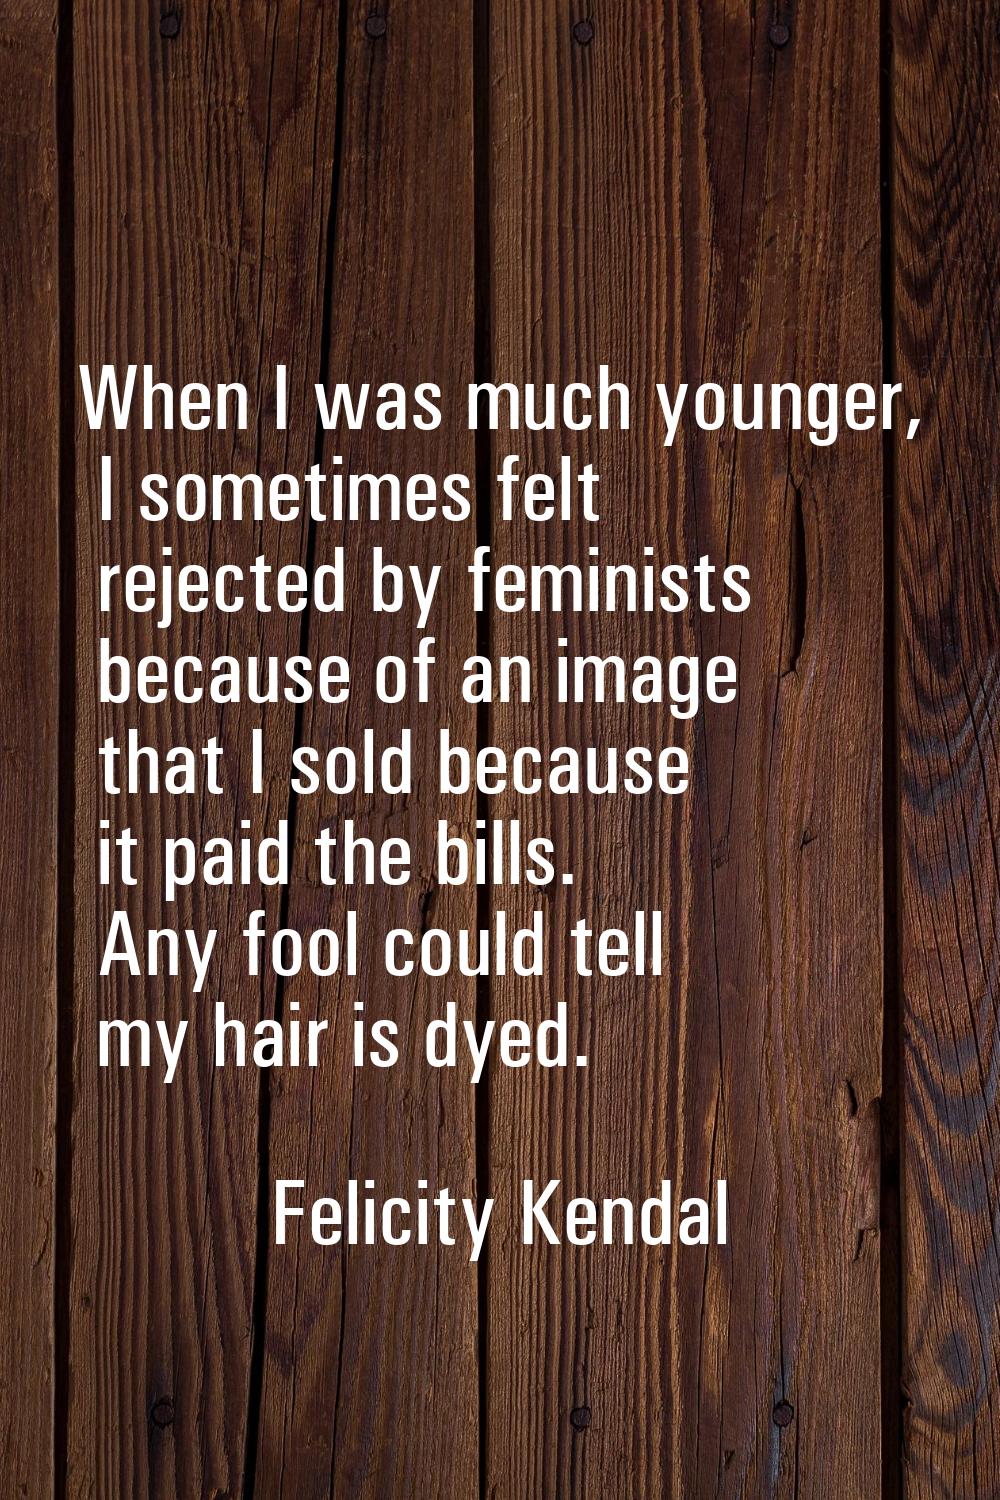 When I was much younger, I sometimes felt rejected by feminists because of an image that I sold bec